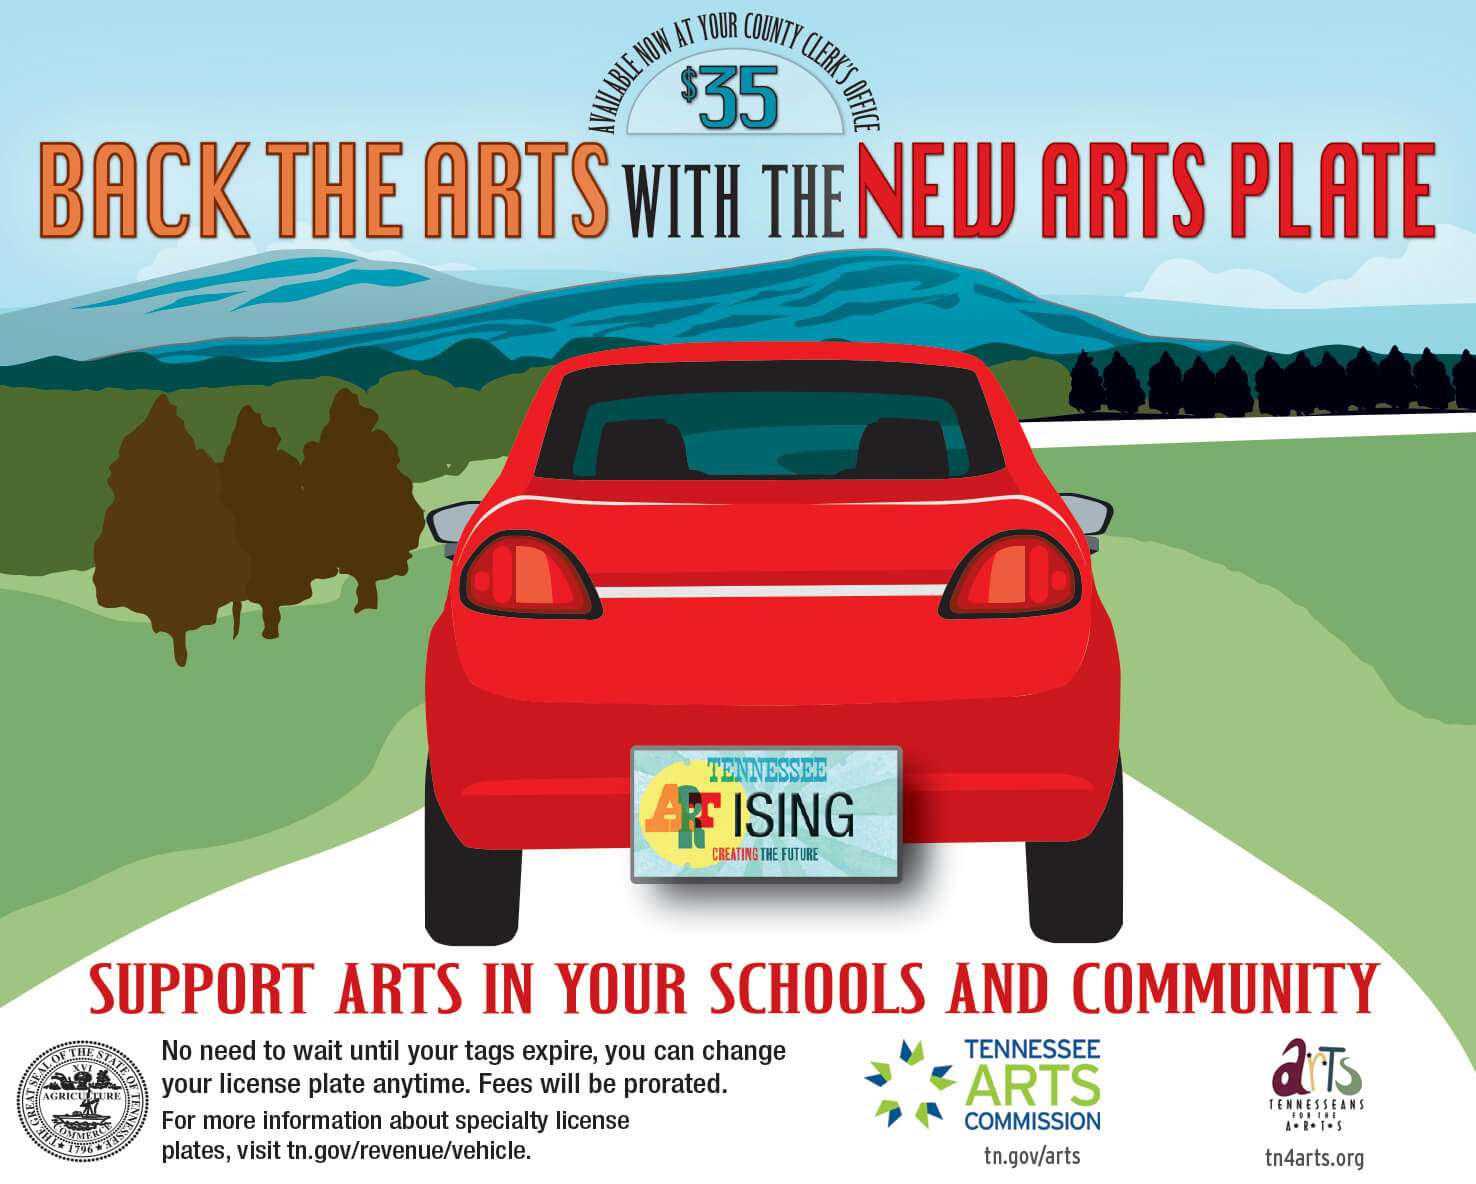 Back the arts with the new Arts plate